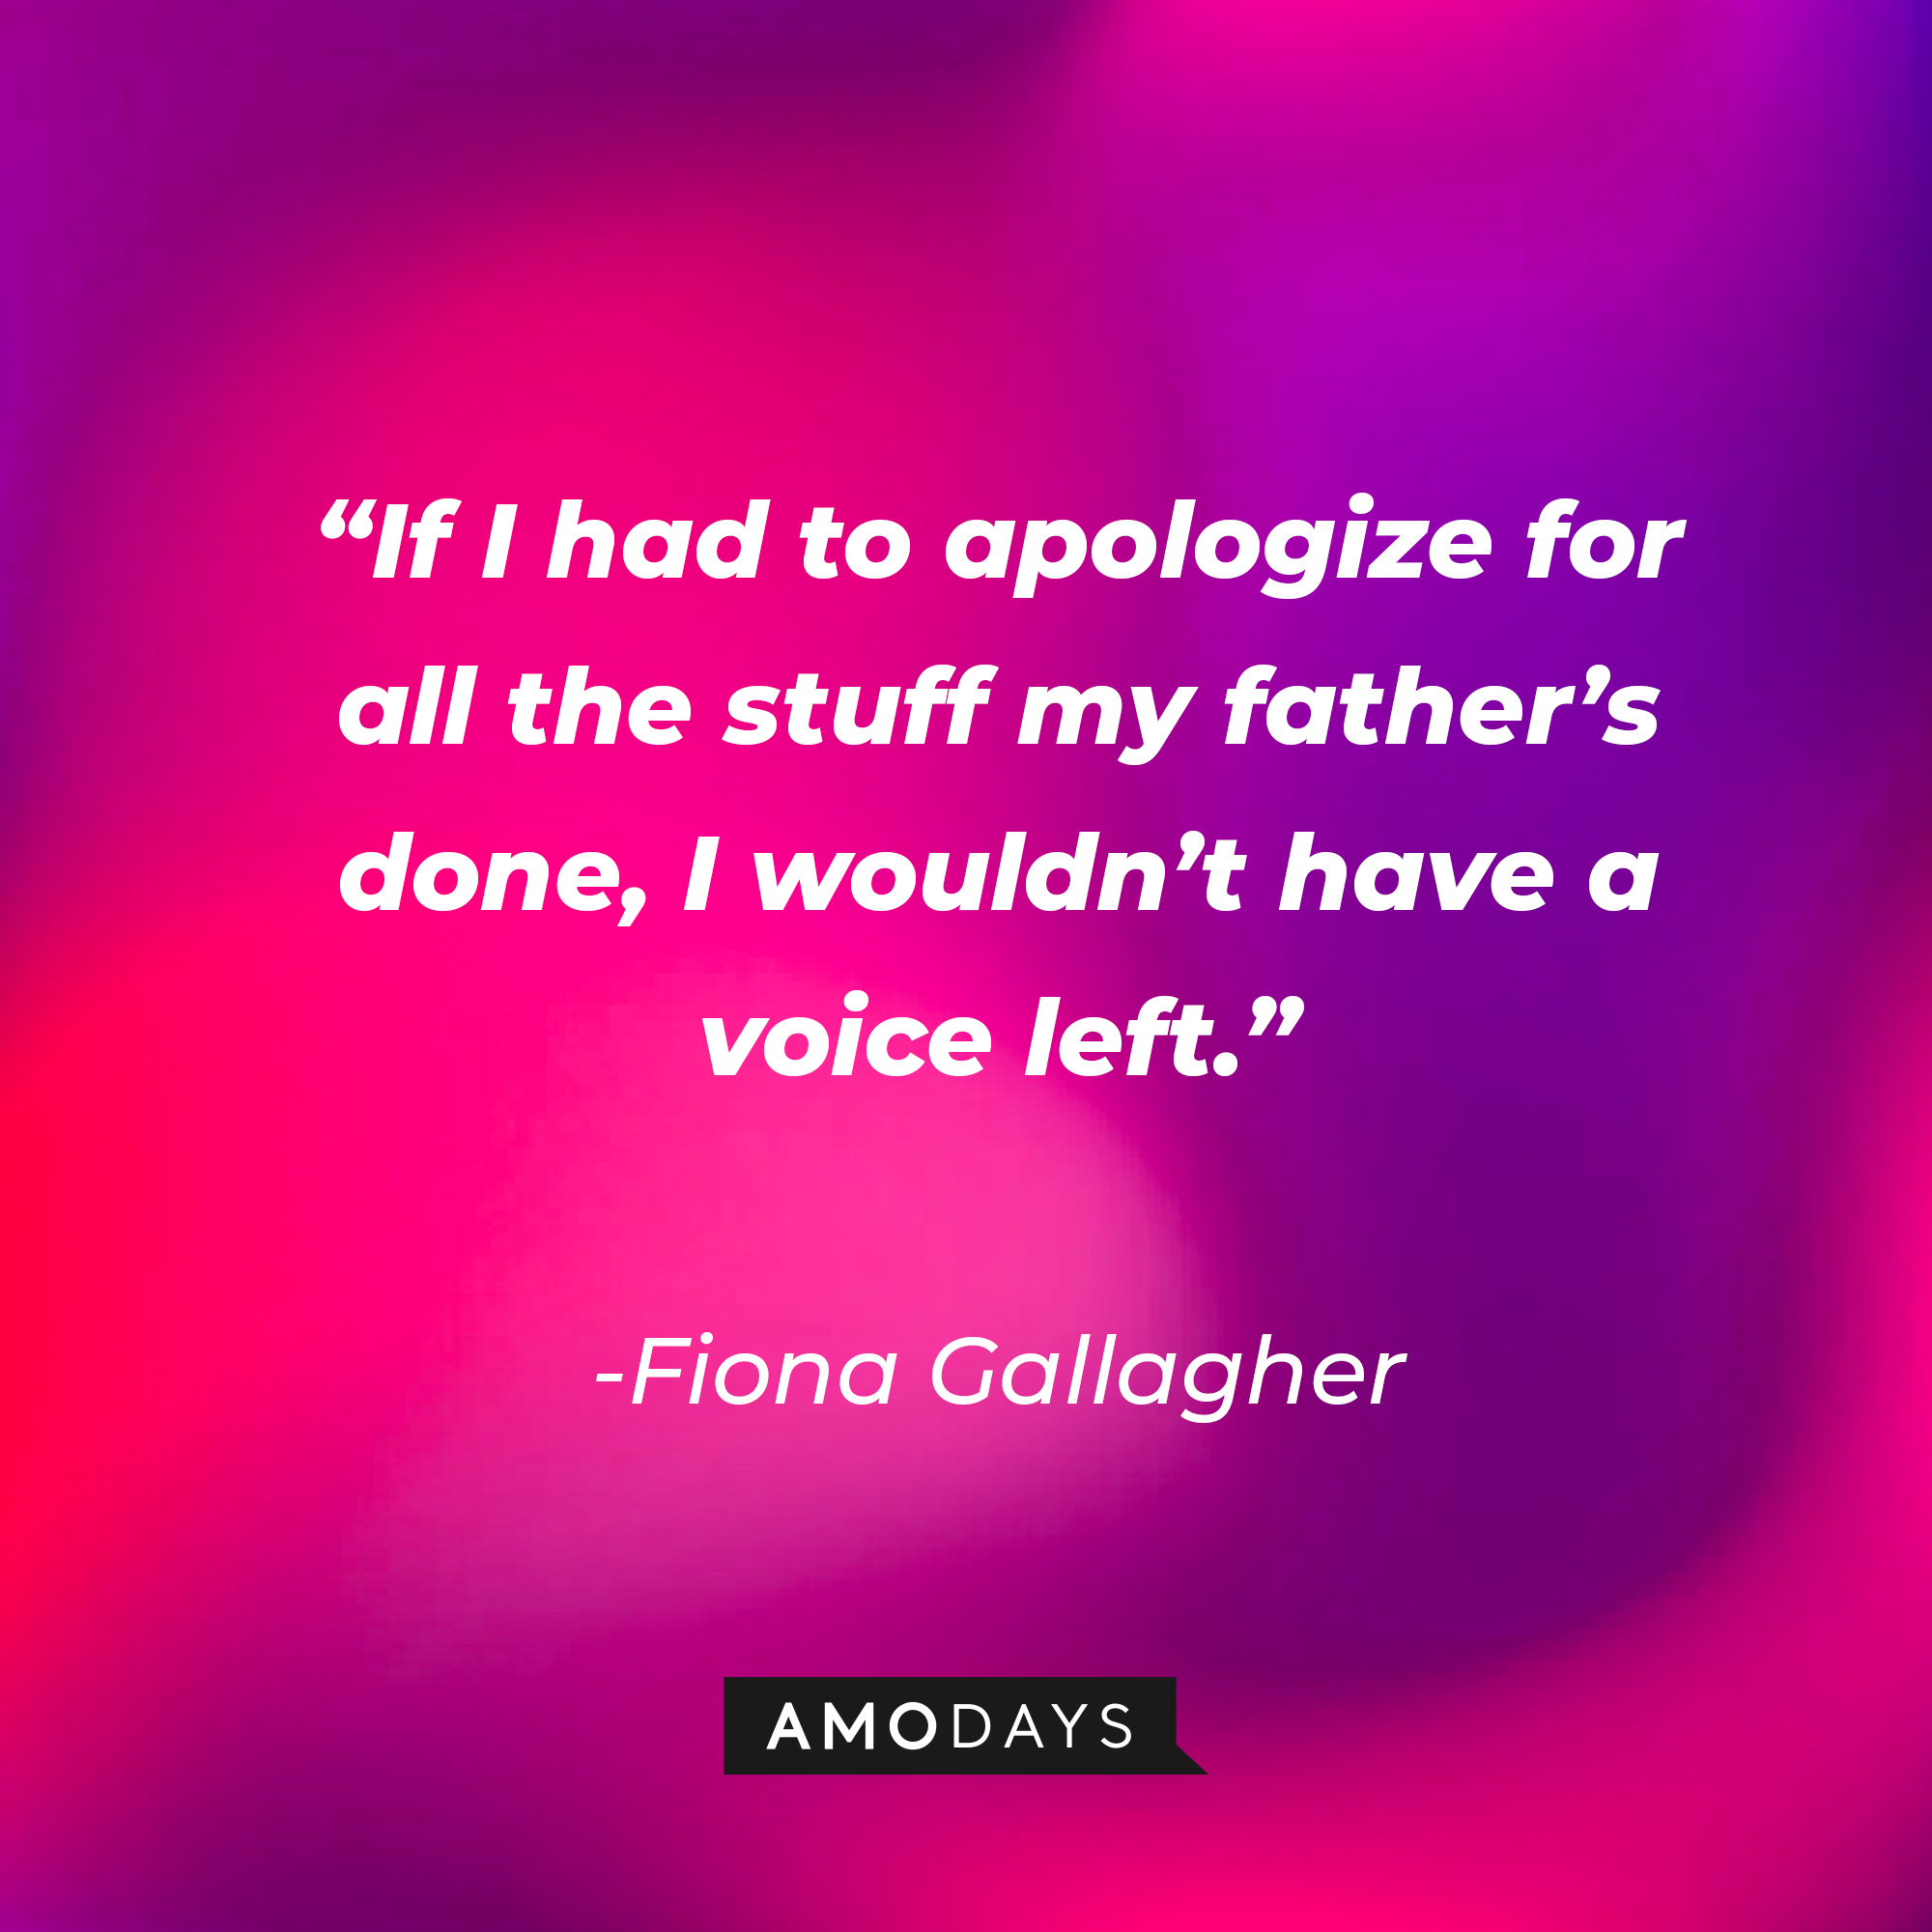 Fiona Gallagher’s quote: “If I had to apologize for all the stuff my father’s done, I wouldn’t have a voice left.” | Source: AmoDays